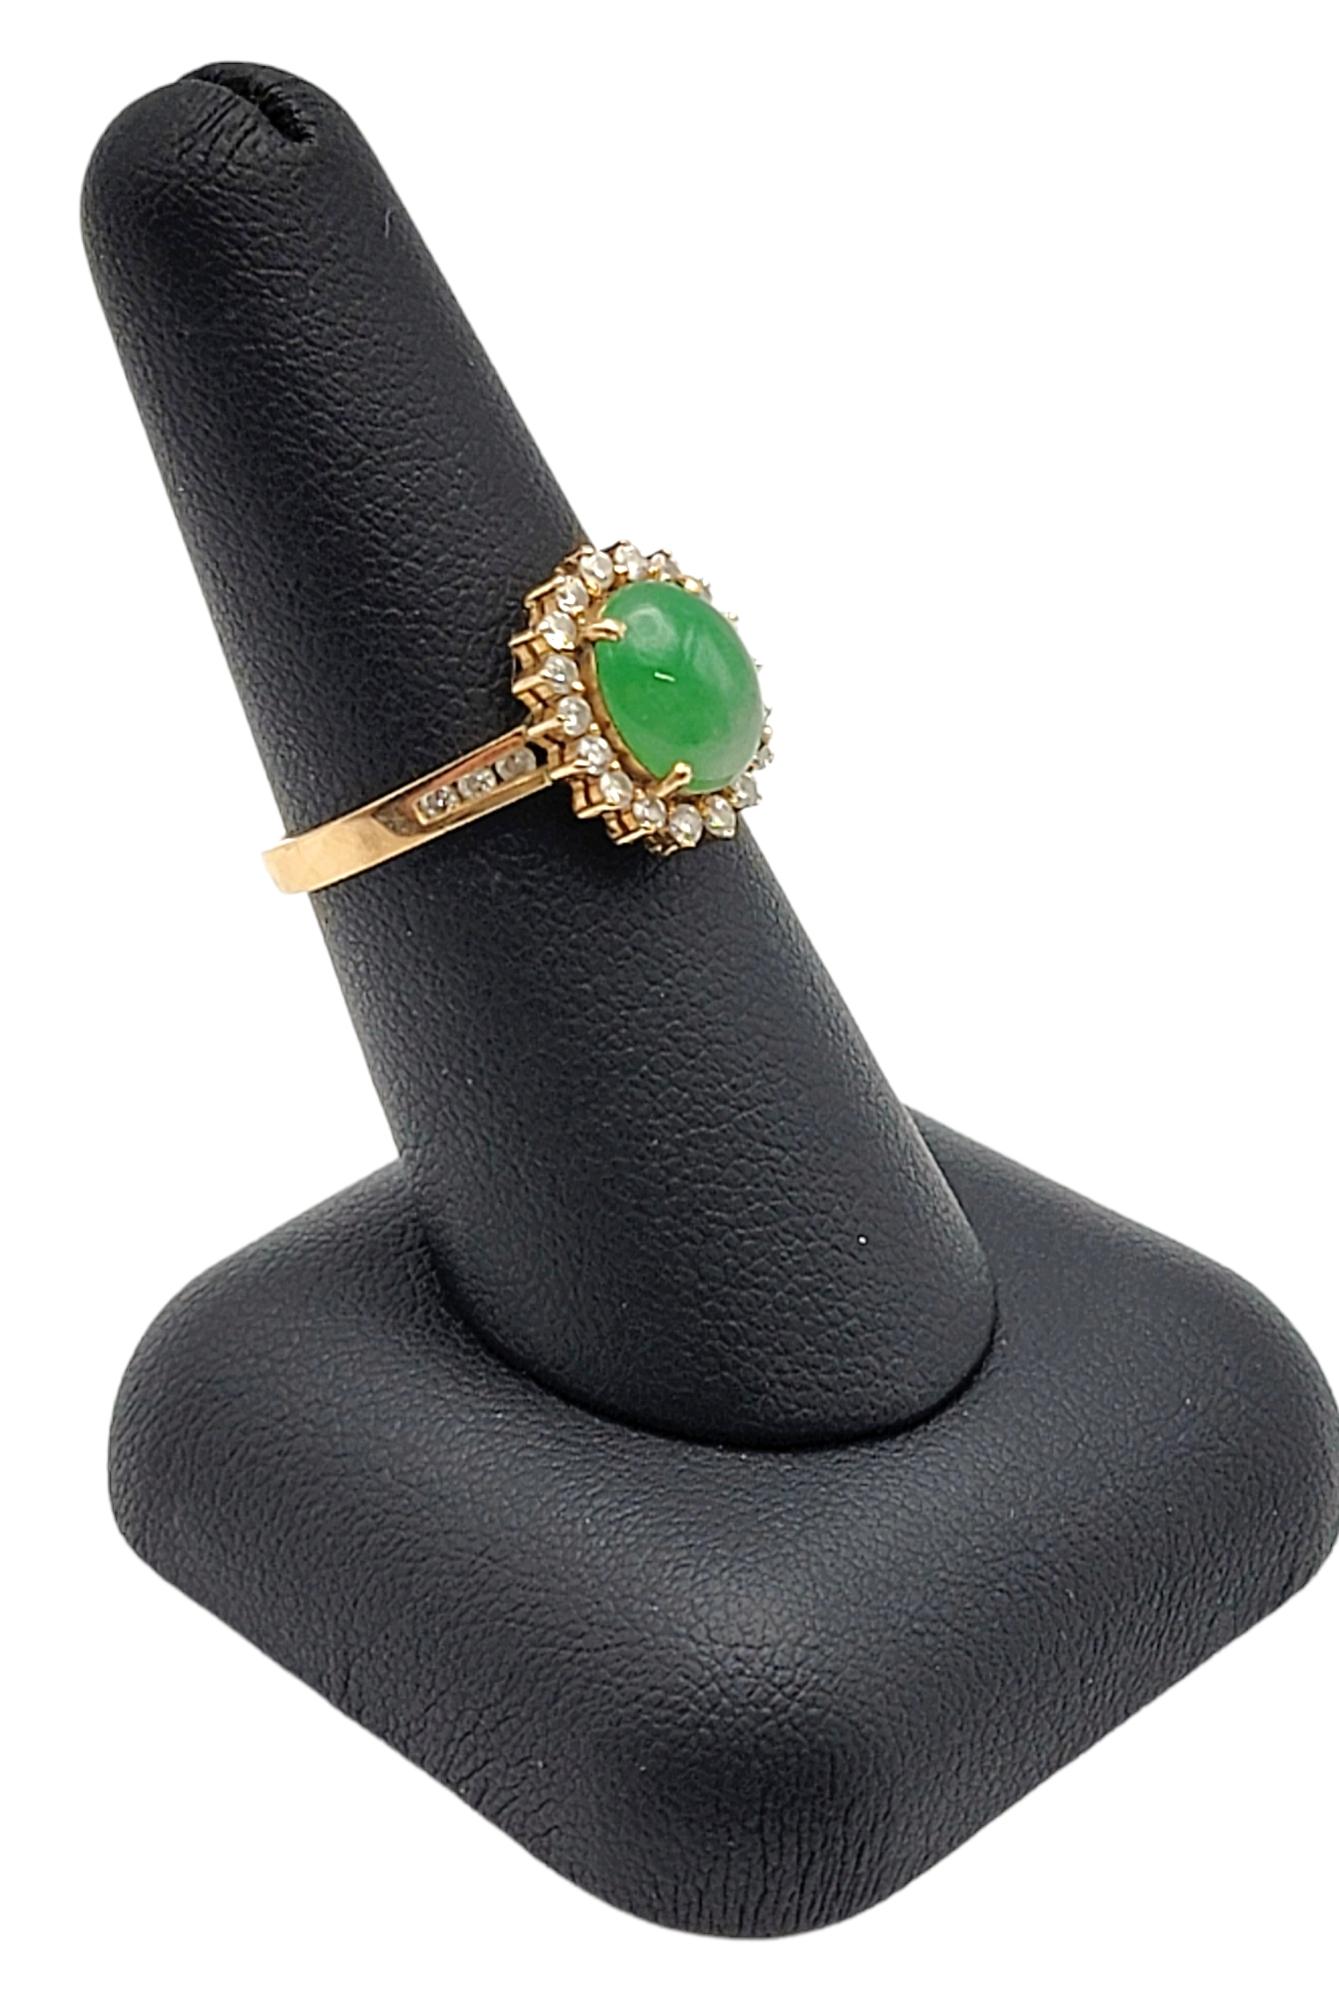 Natural Oval Cabochon Jade and Diamond Halo Ring in 14 Karat Yellow Gold For Sale 5